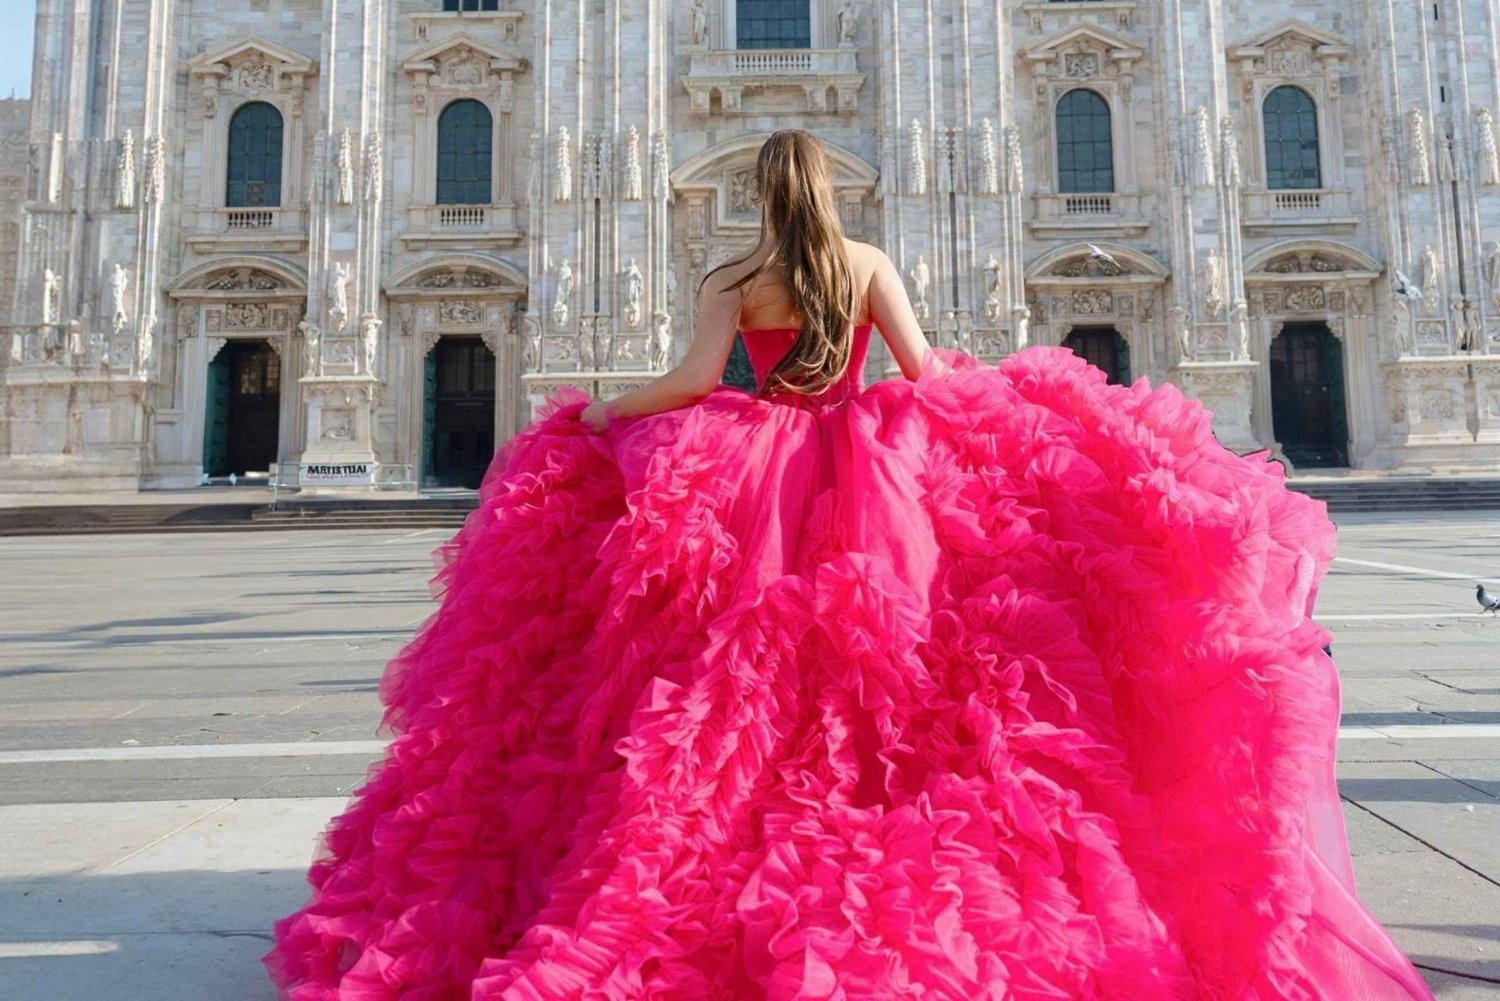 Photoshoot with a fairytale Dress in the heart of Milan